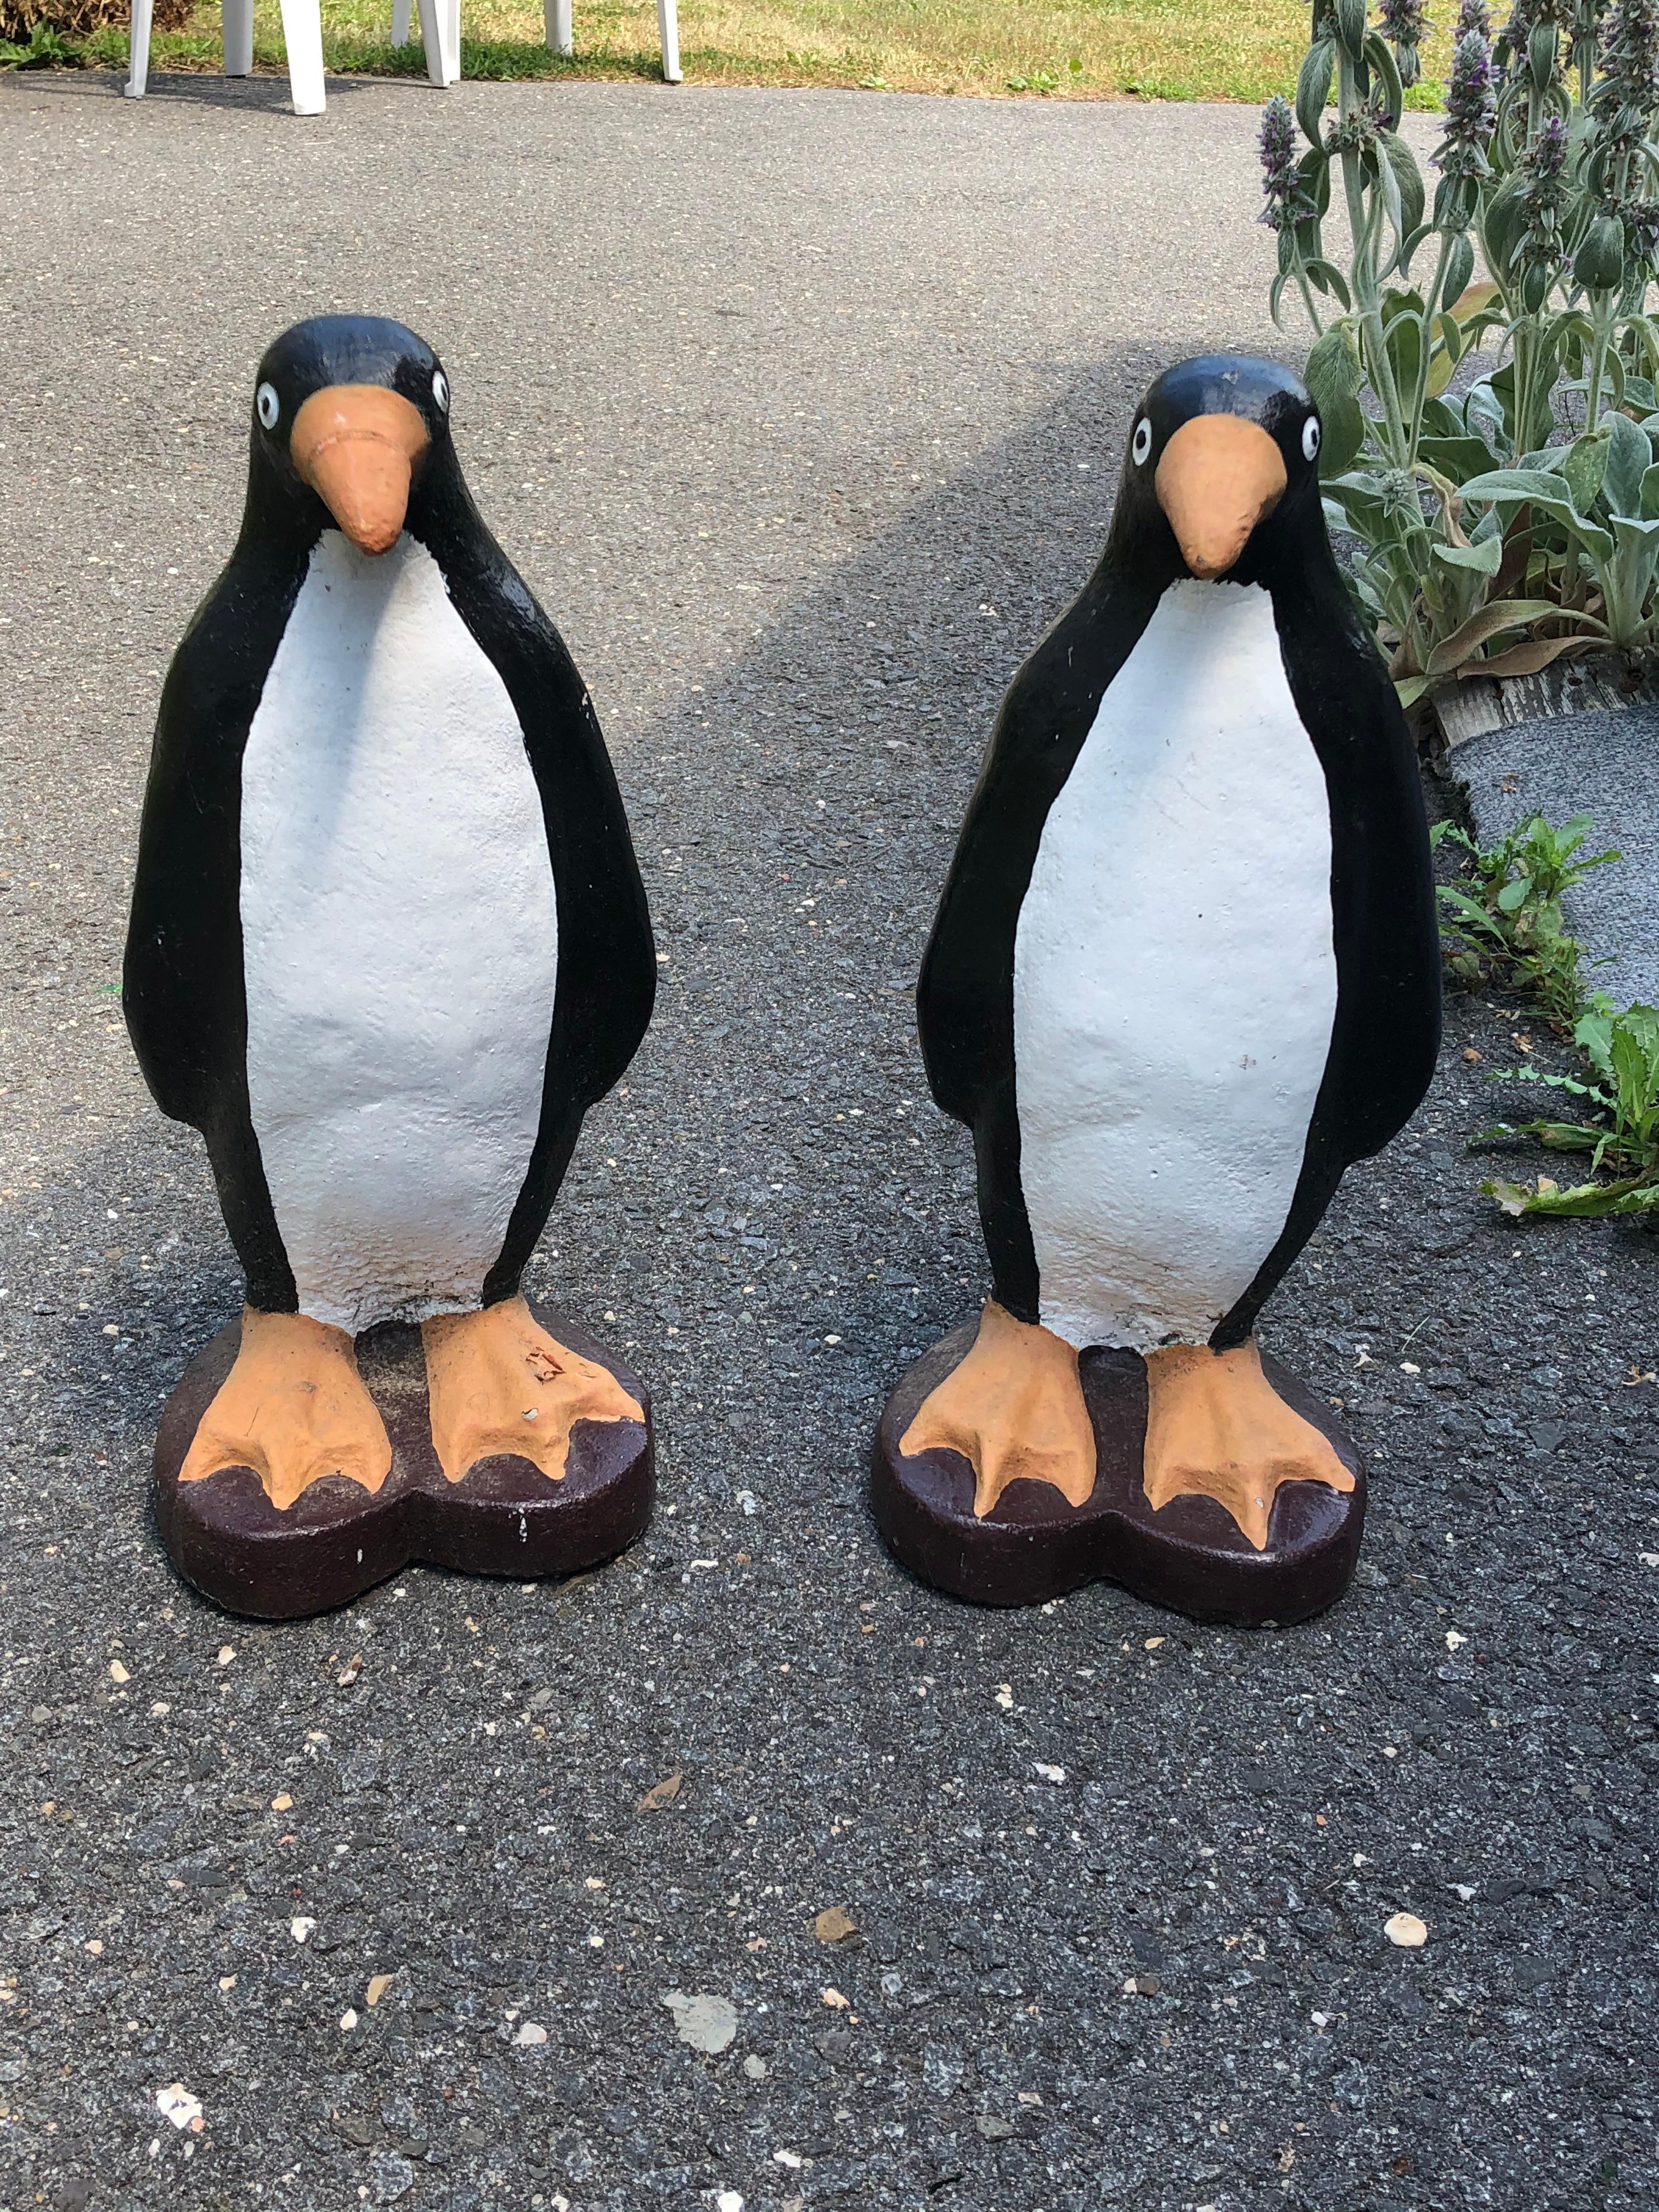 An adorable pair of vintage cast cement garden or patio adornments that are black, white and yellow enchanting penguins. Original paint and heart shaped bases.